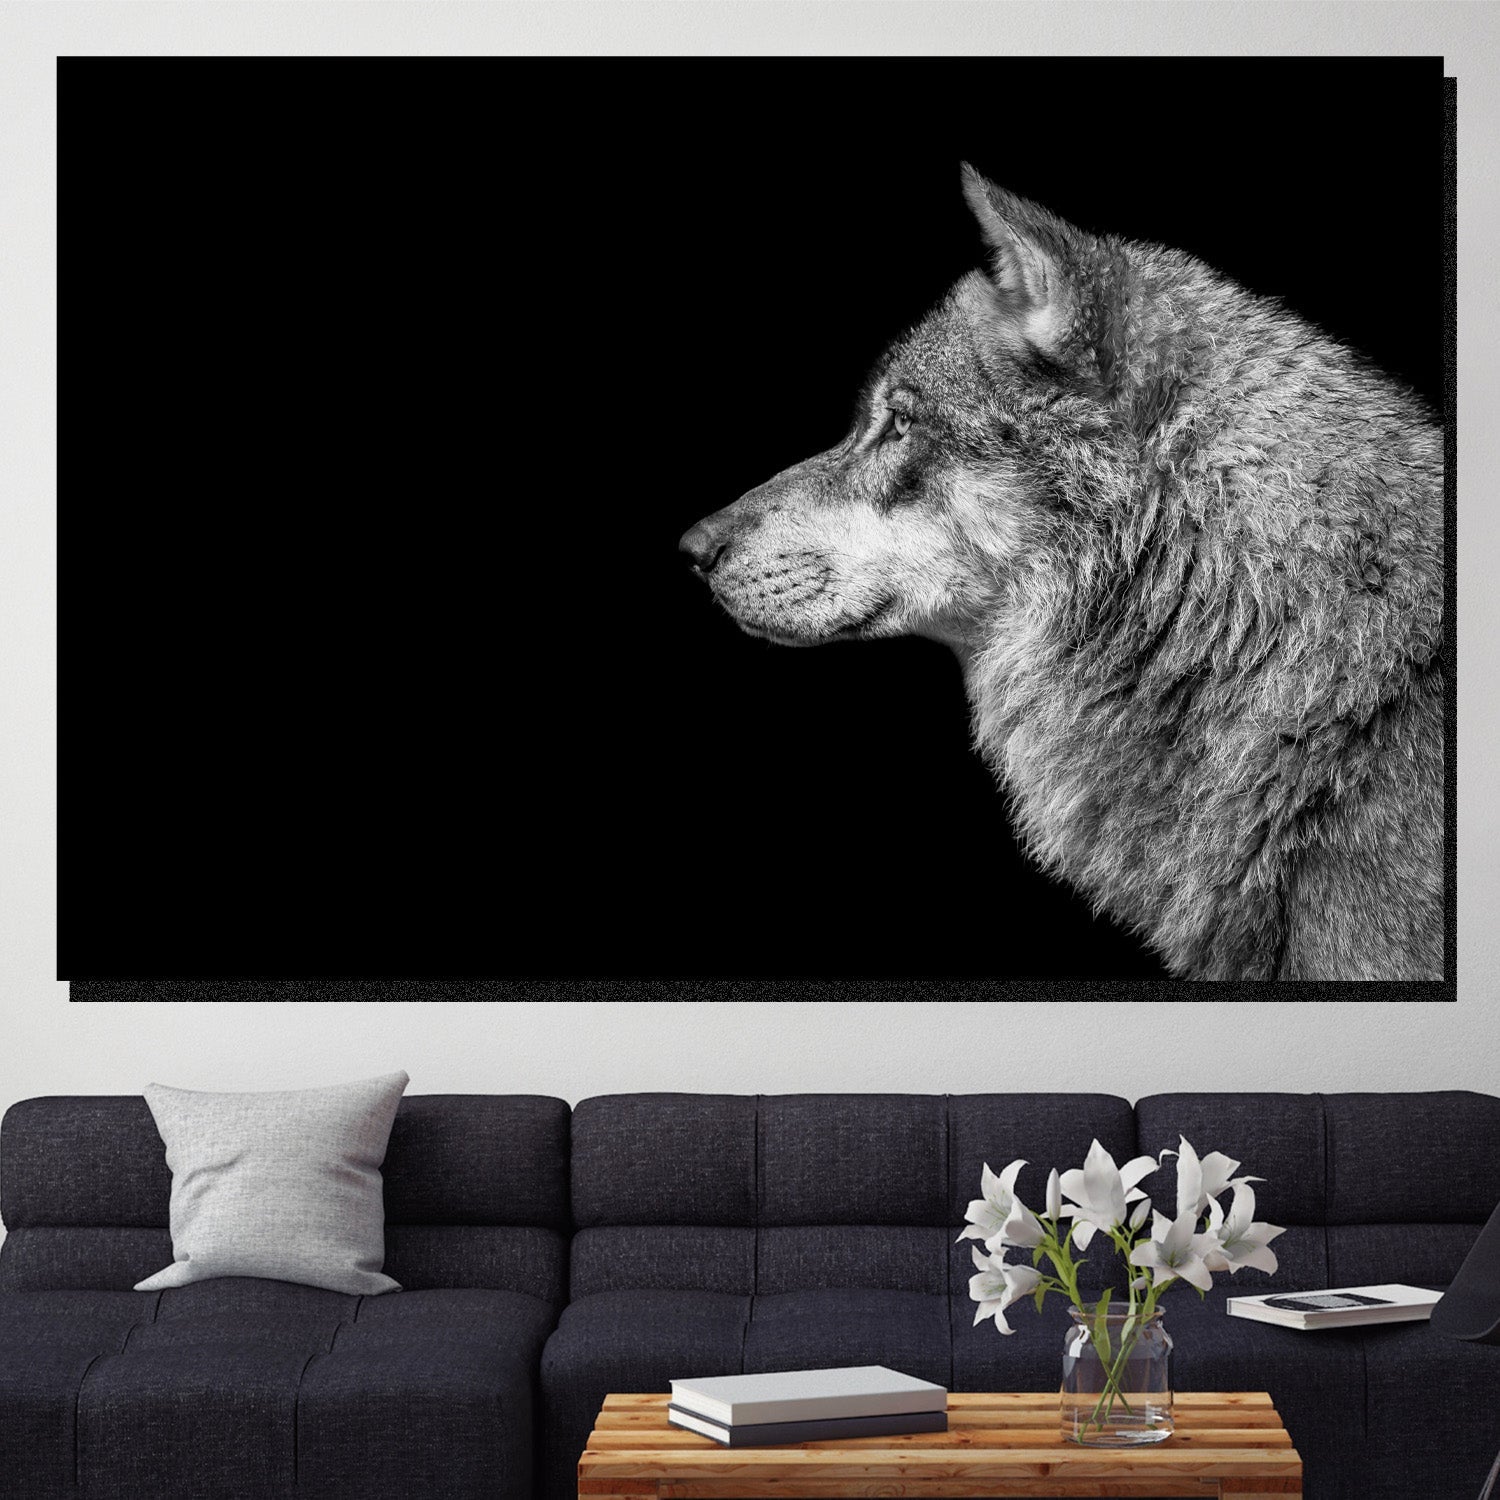 https://cdn.shopify.com/s/files/1/0387/9986/8044/products/WolfSideViewCanvasArtprintStretched-1.jpg